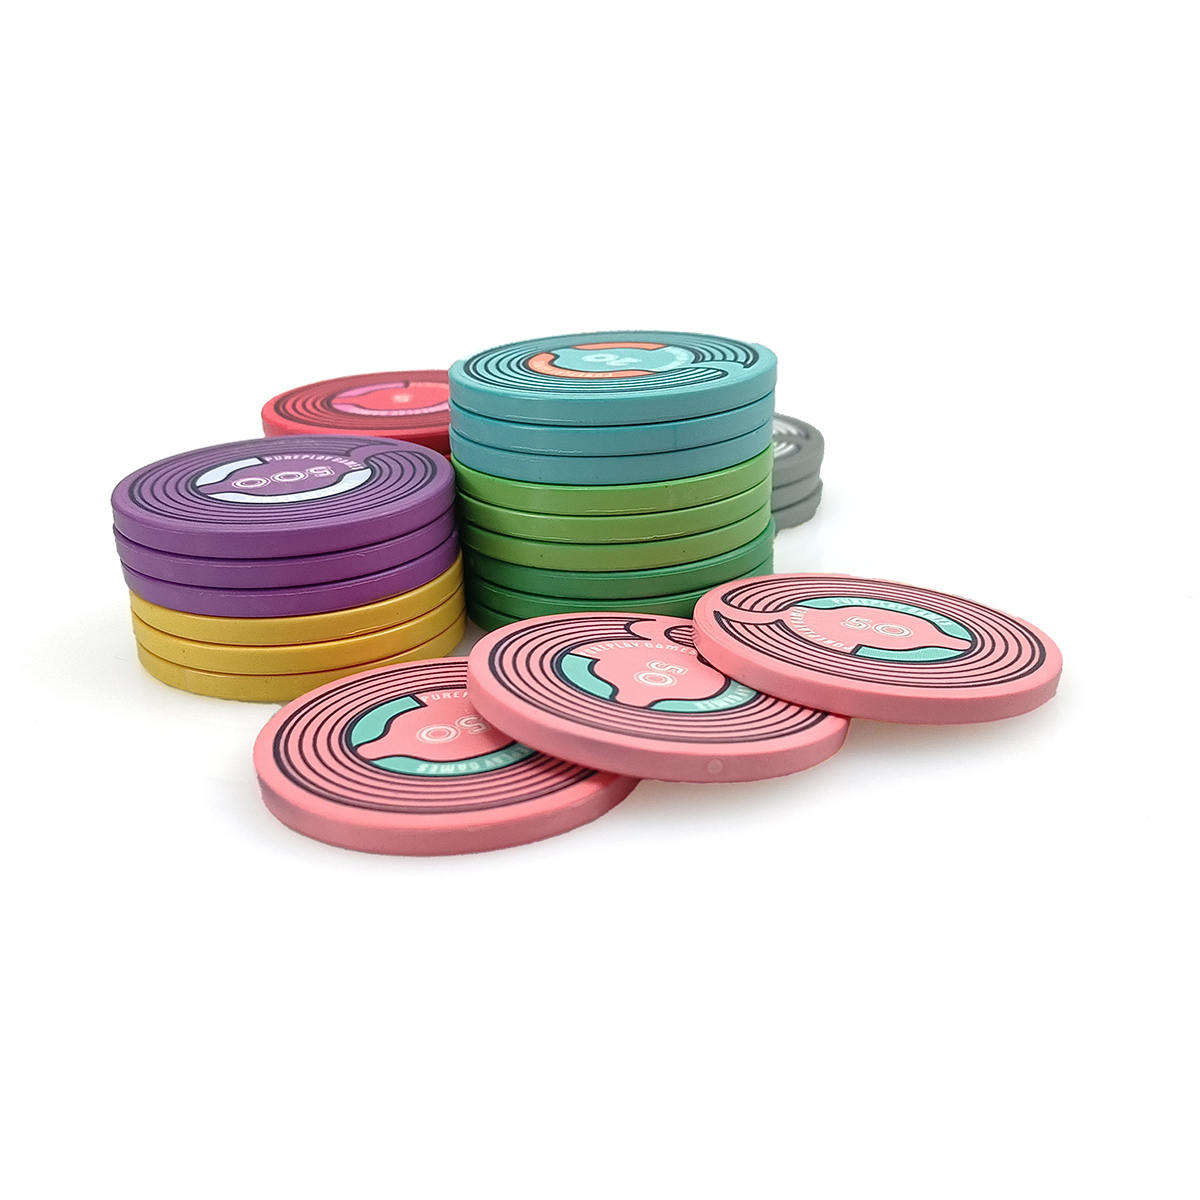 CMC060 Ready to Ship Ceramic 39mm Poker Chips 10g Custom Ept Logo Free Design Free Sample from Kaile Poker Chips Factory for Table Game